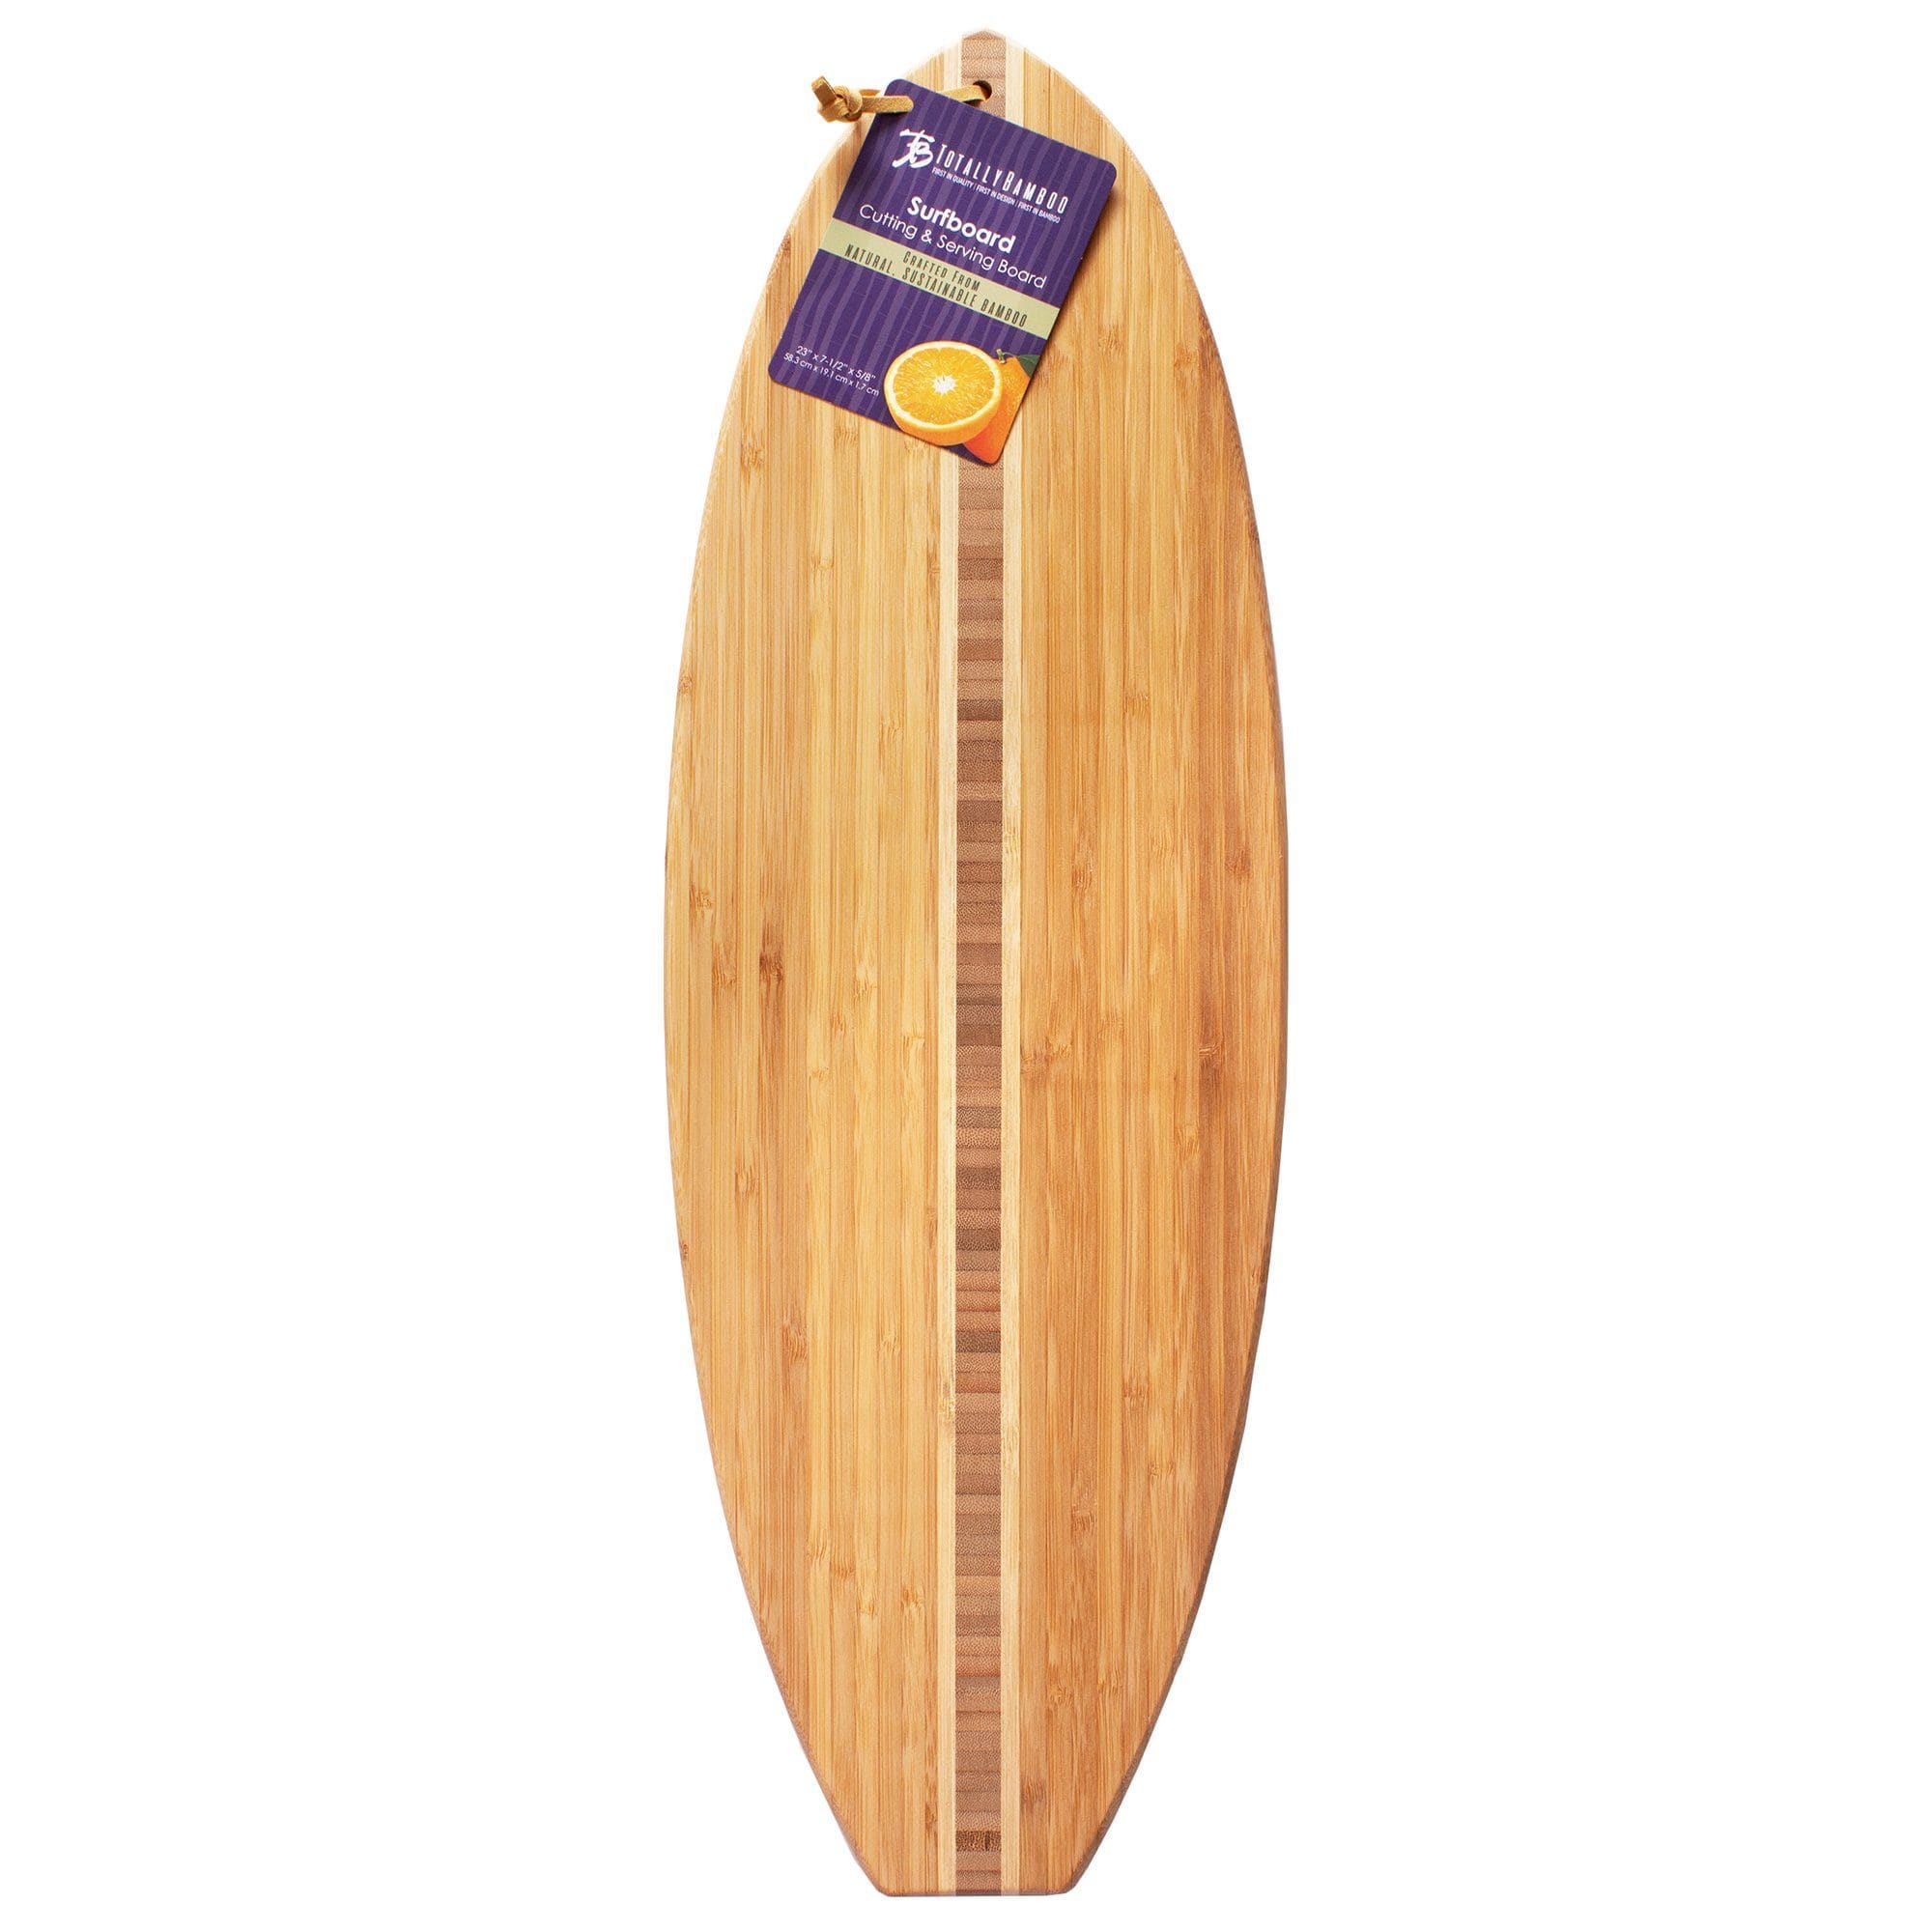 Totally Bamboo Surfboard Shaped Bamboo Wood Cutting Board and Charcuterie  Serving Board, 23 x 7-1/2